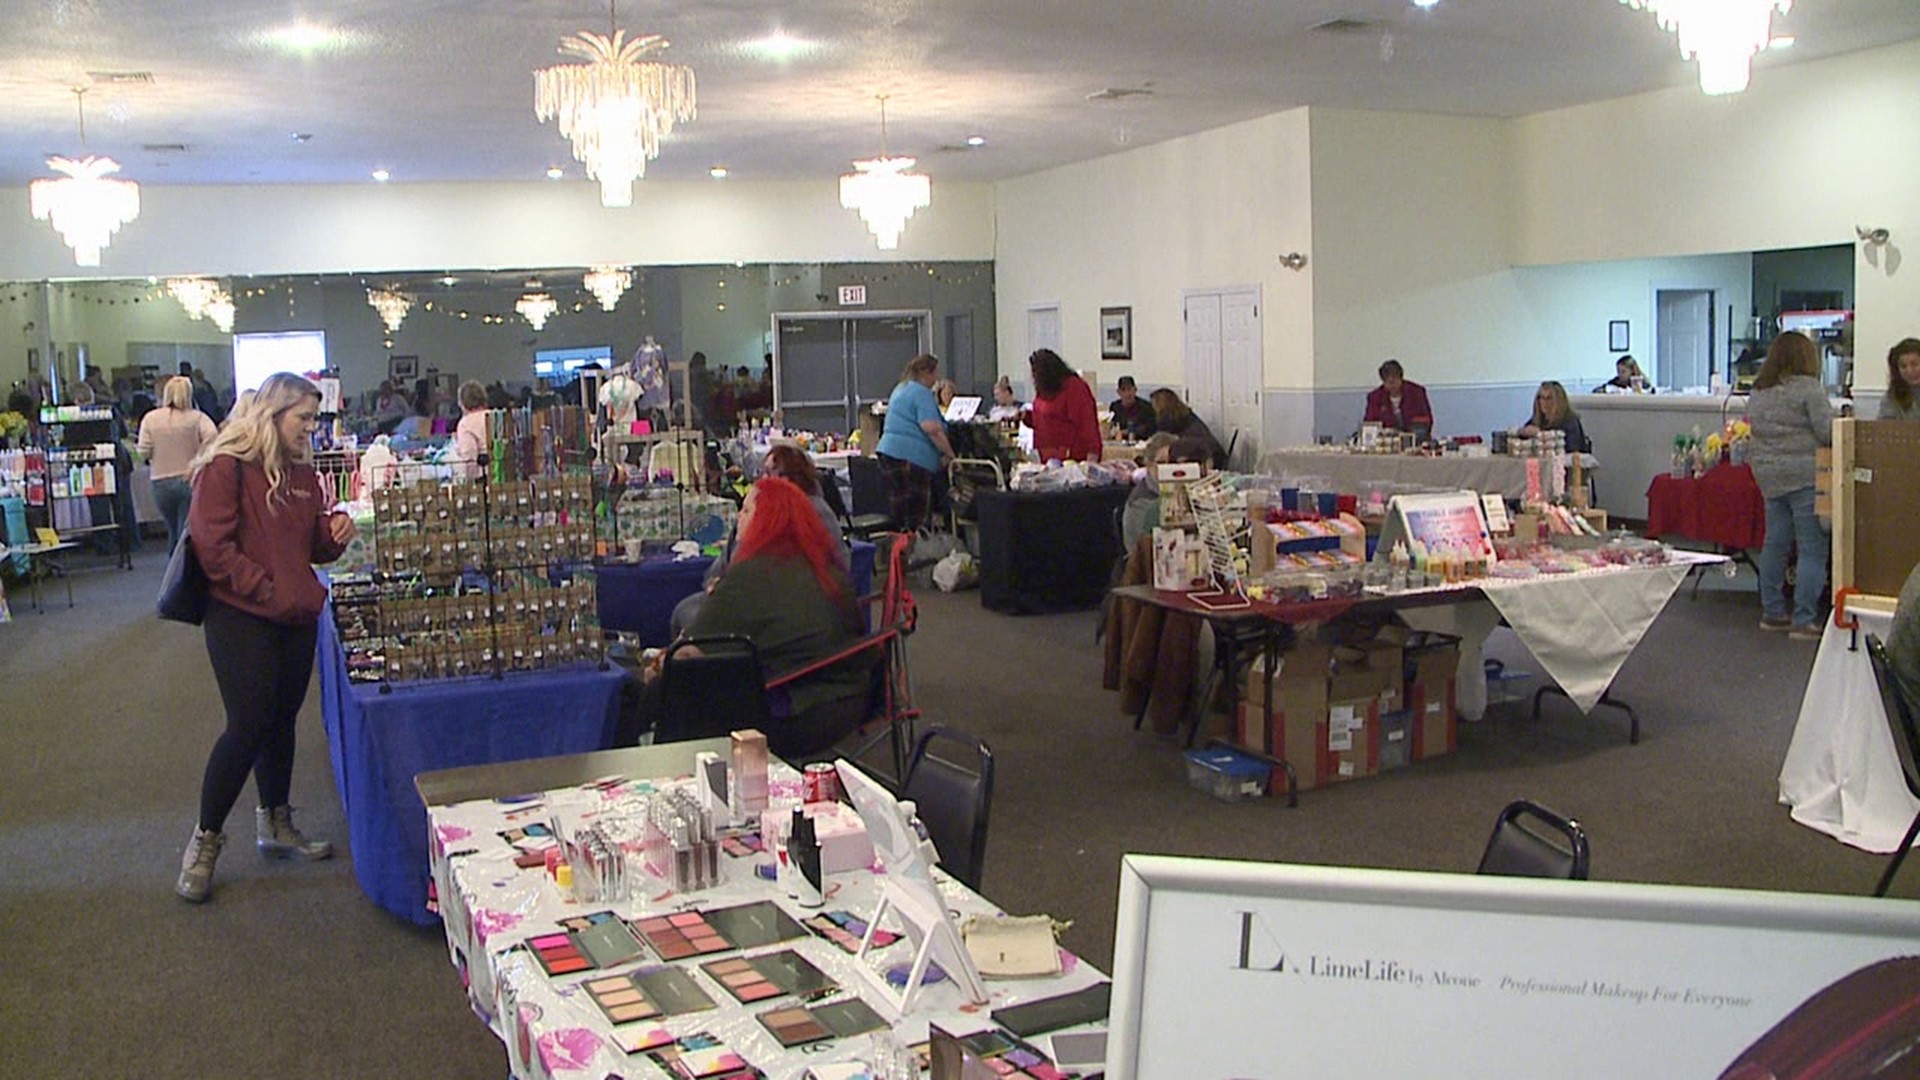 The craft show was held at the West Wyoming Hose Company from 9 a.m. to 3 p.m.